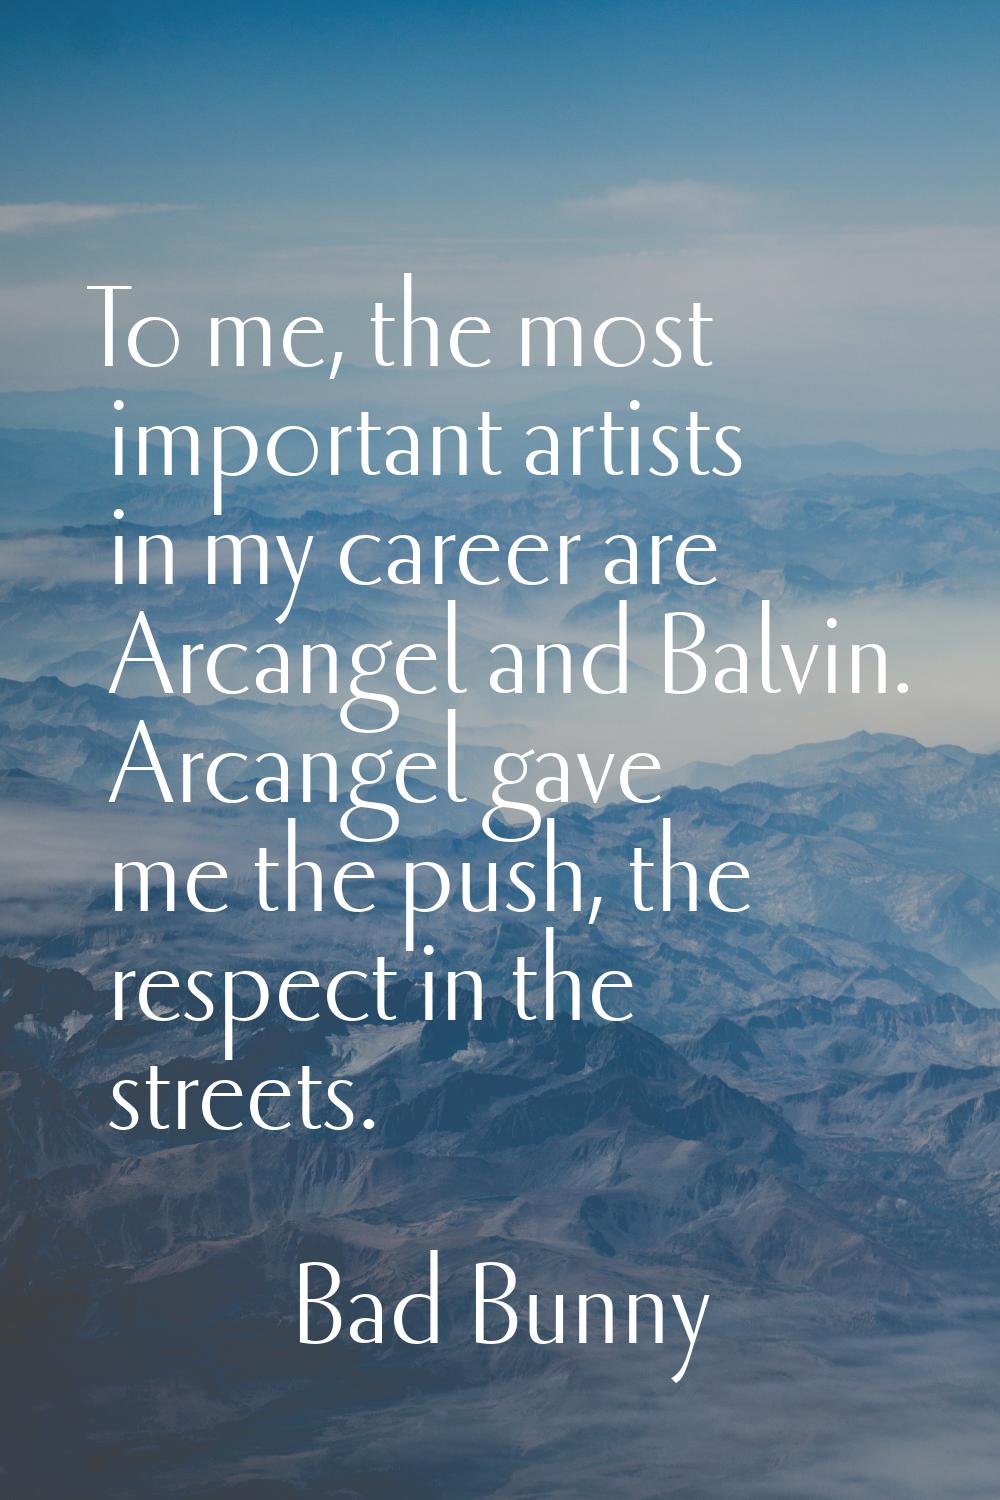 To me, the most important artists in my career are Arcangel and Balvin. Arcangel gave me the push, 